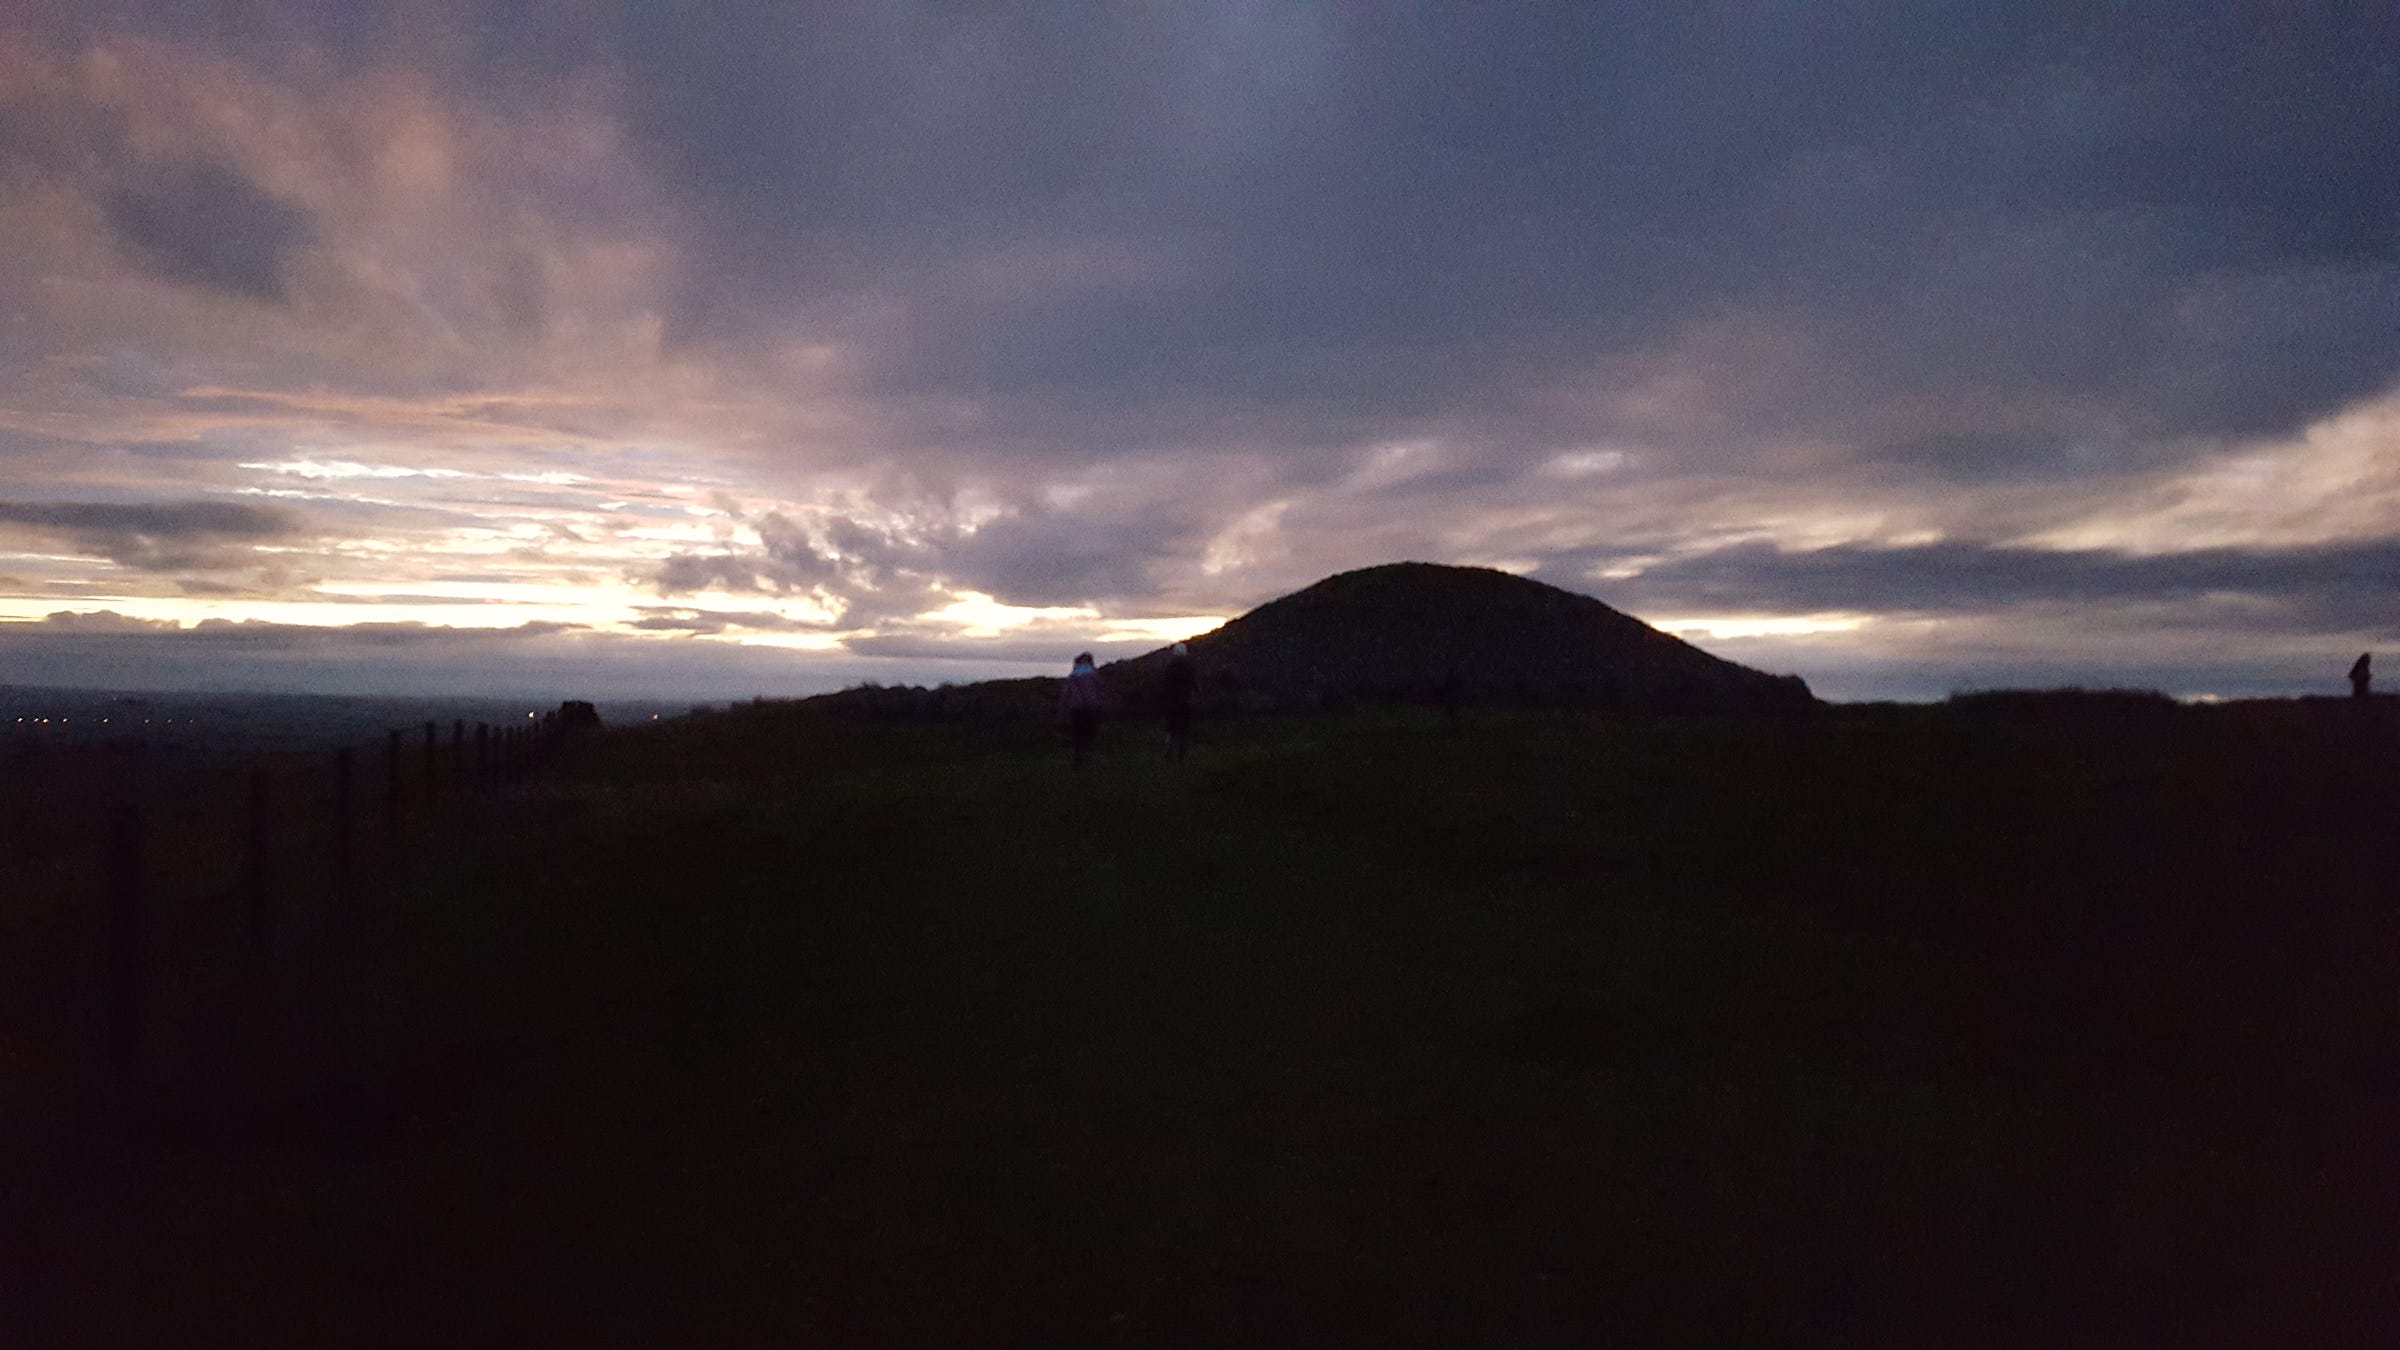 Black silhouette of cairn T, Loughcrew, against a purple sky as clouds begin to tear apart to reveal the rising sun, autumn equinox, 2015.